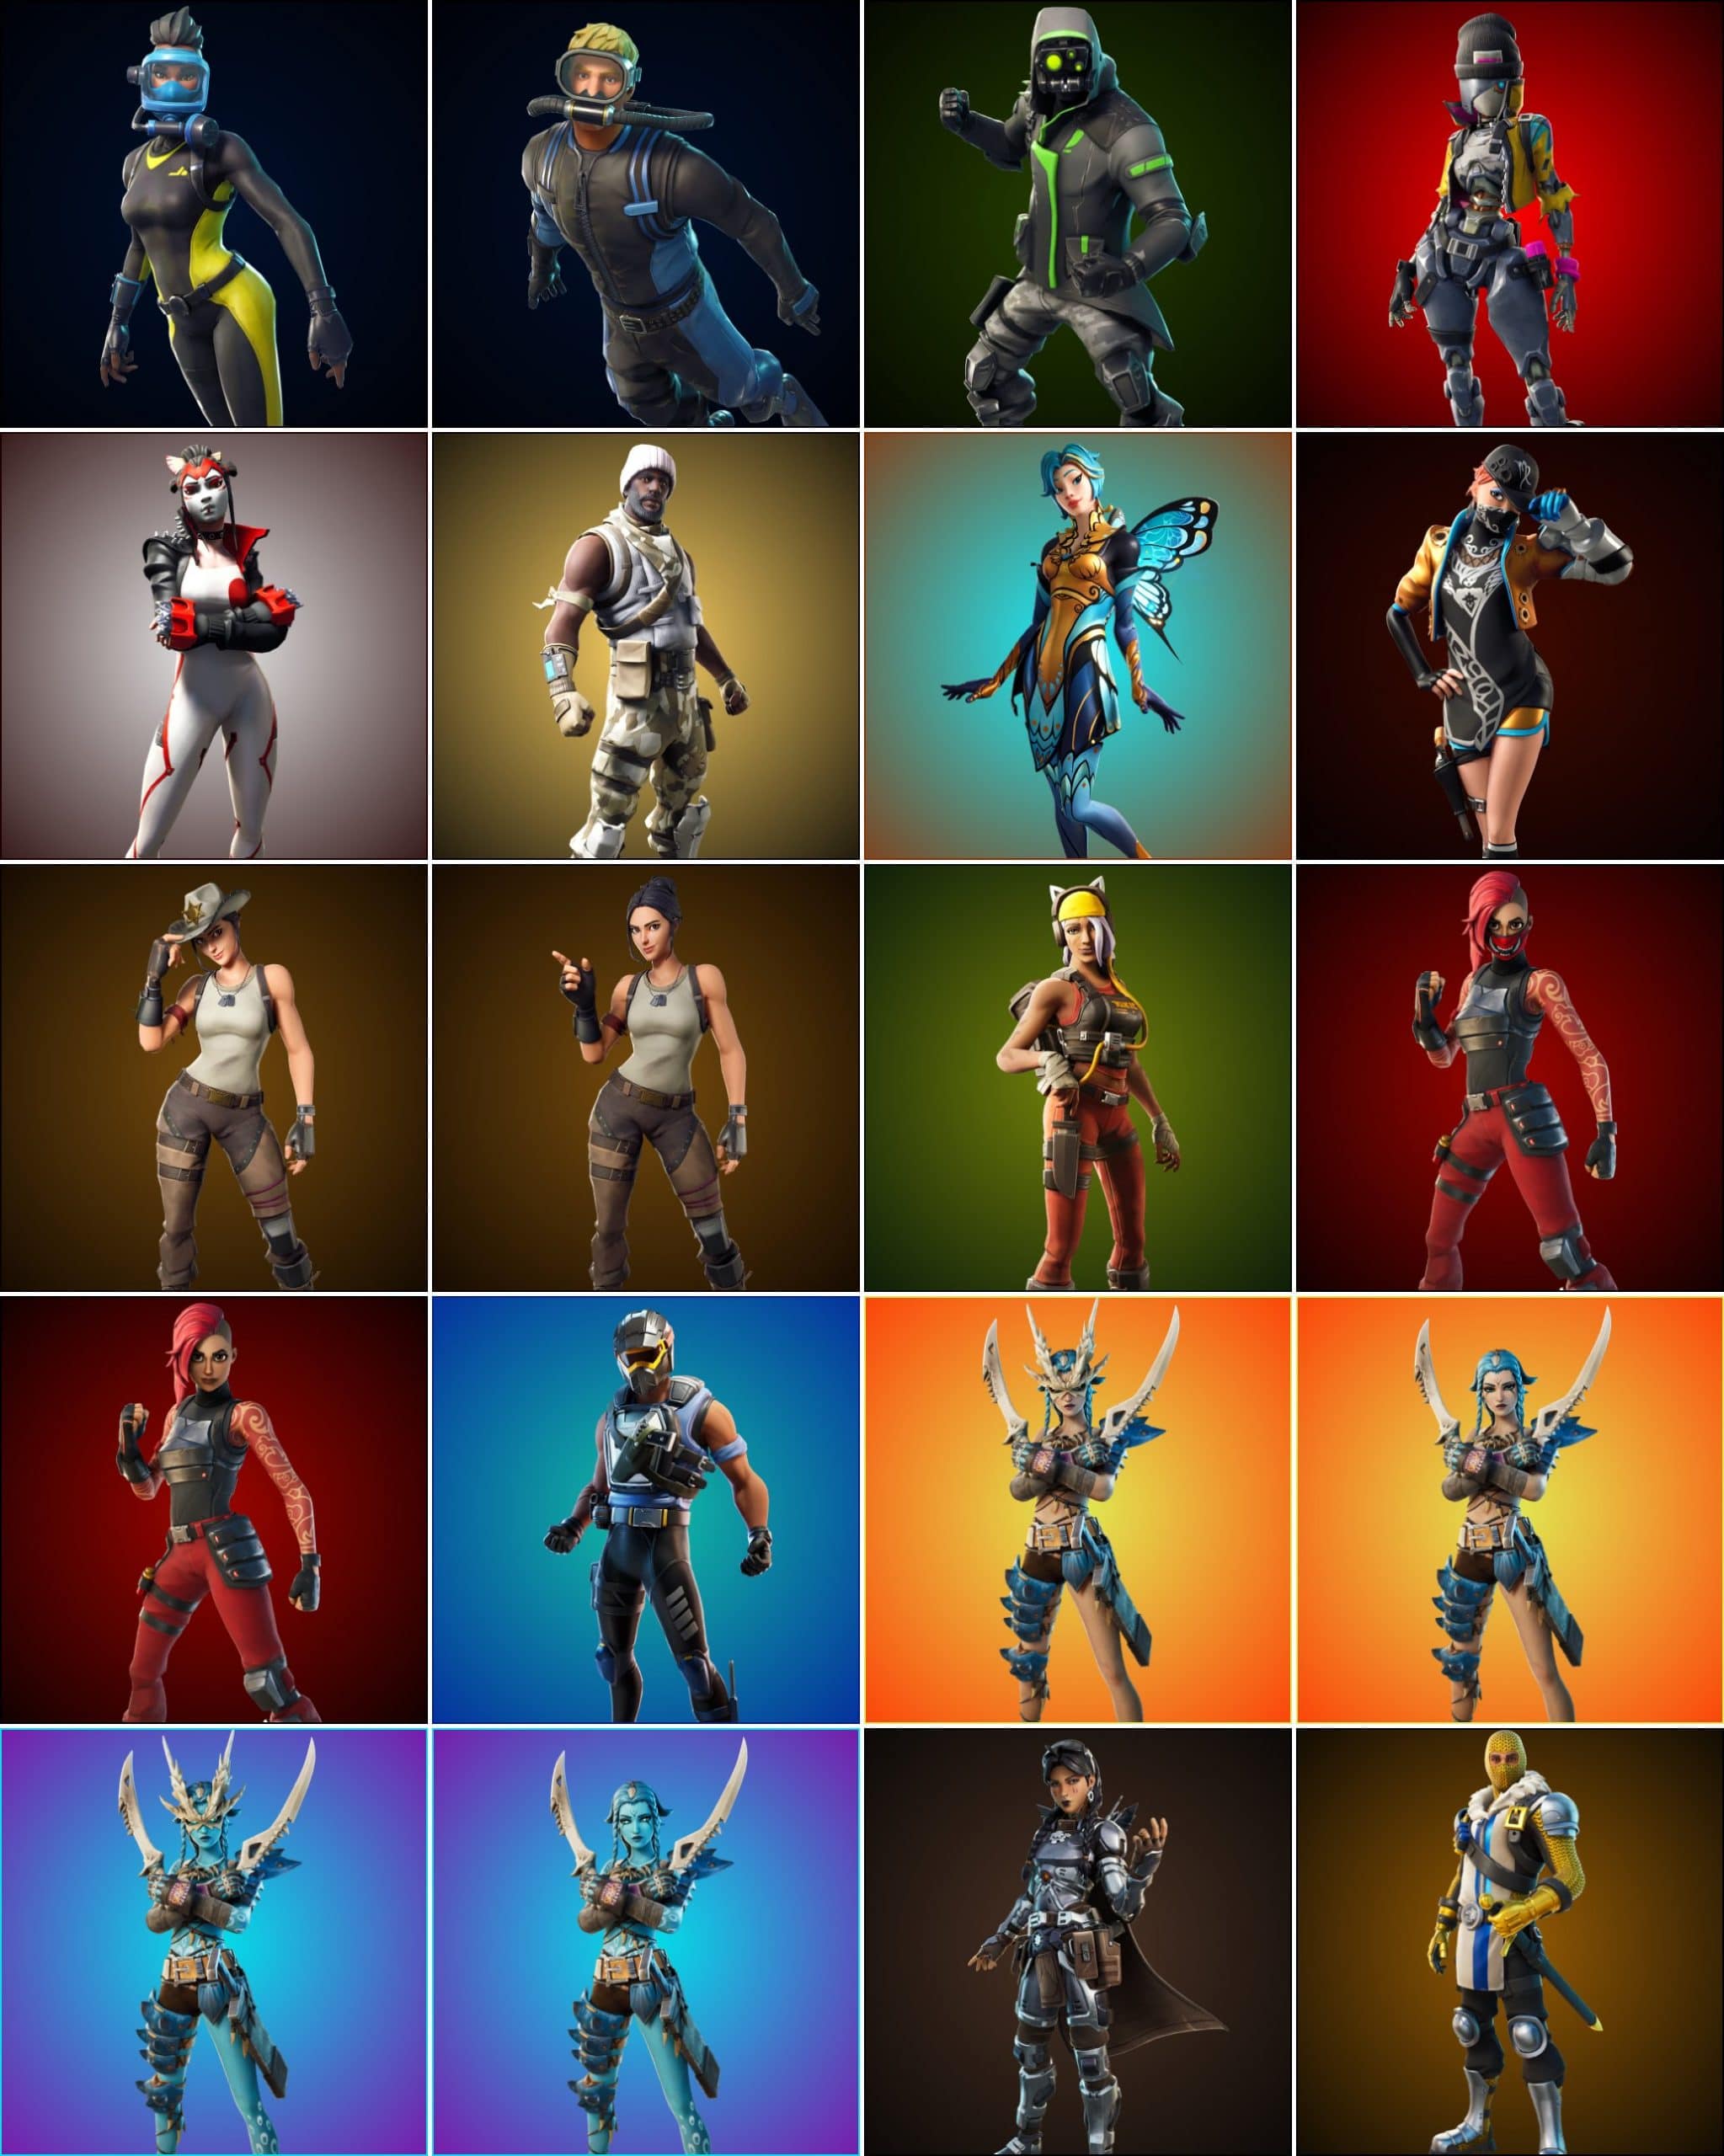 Fortnite 16.30 leaks - all the skins and other cosmetic items